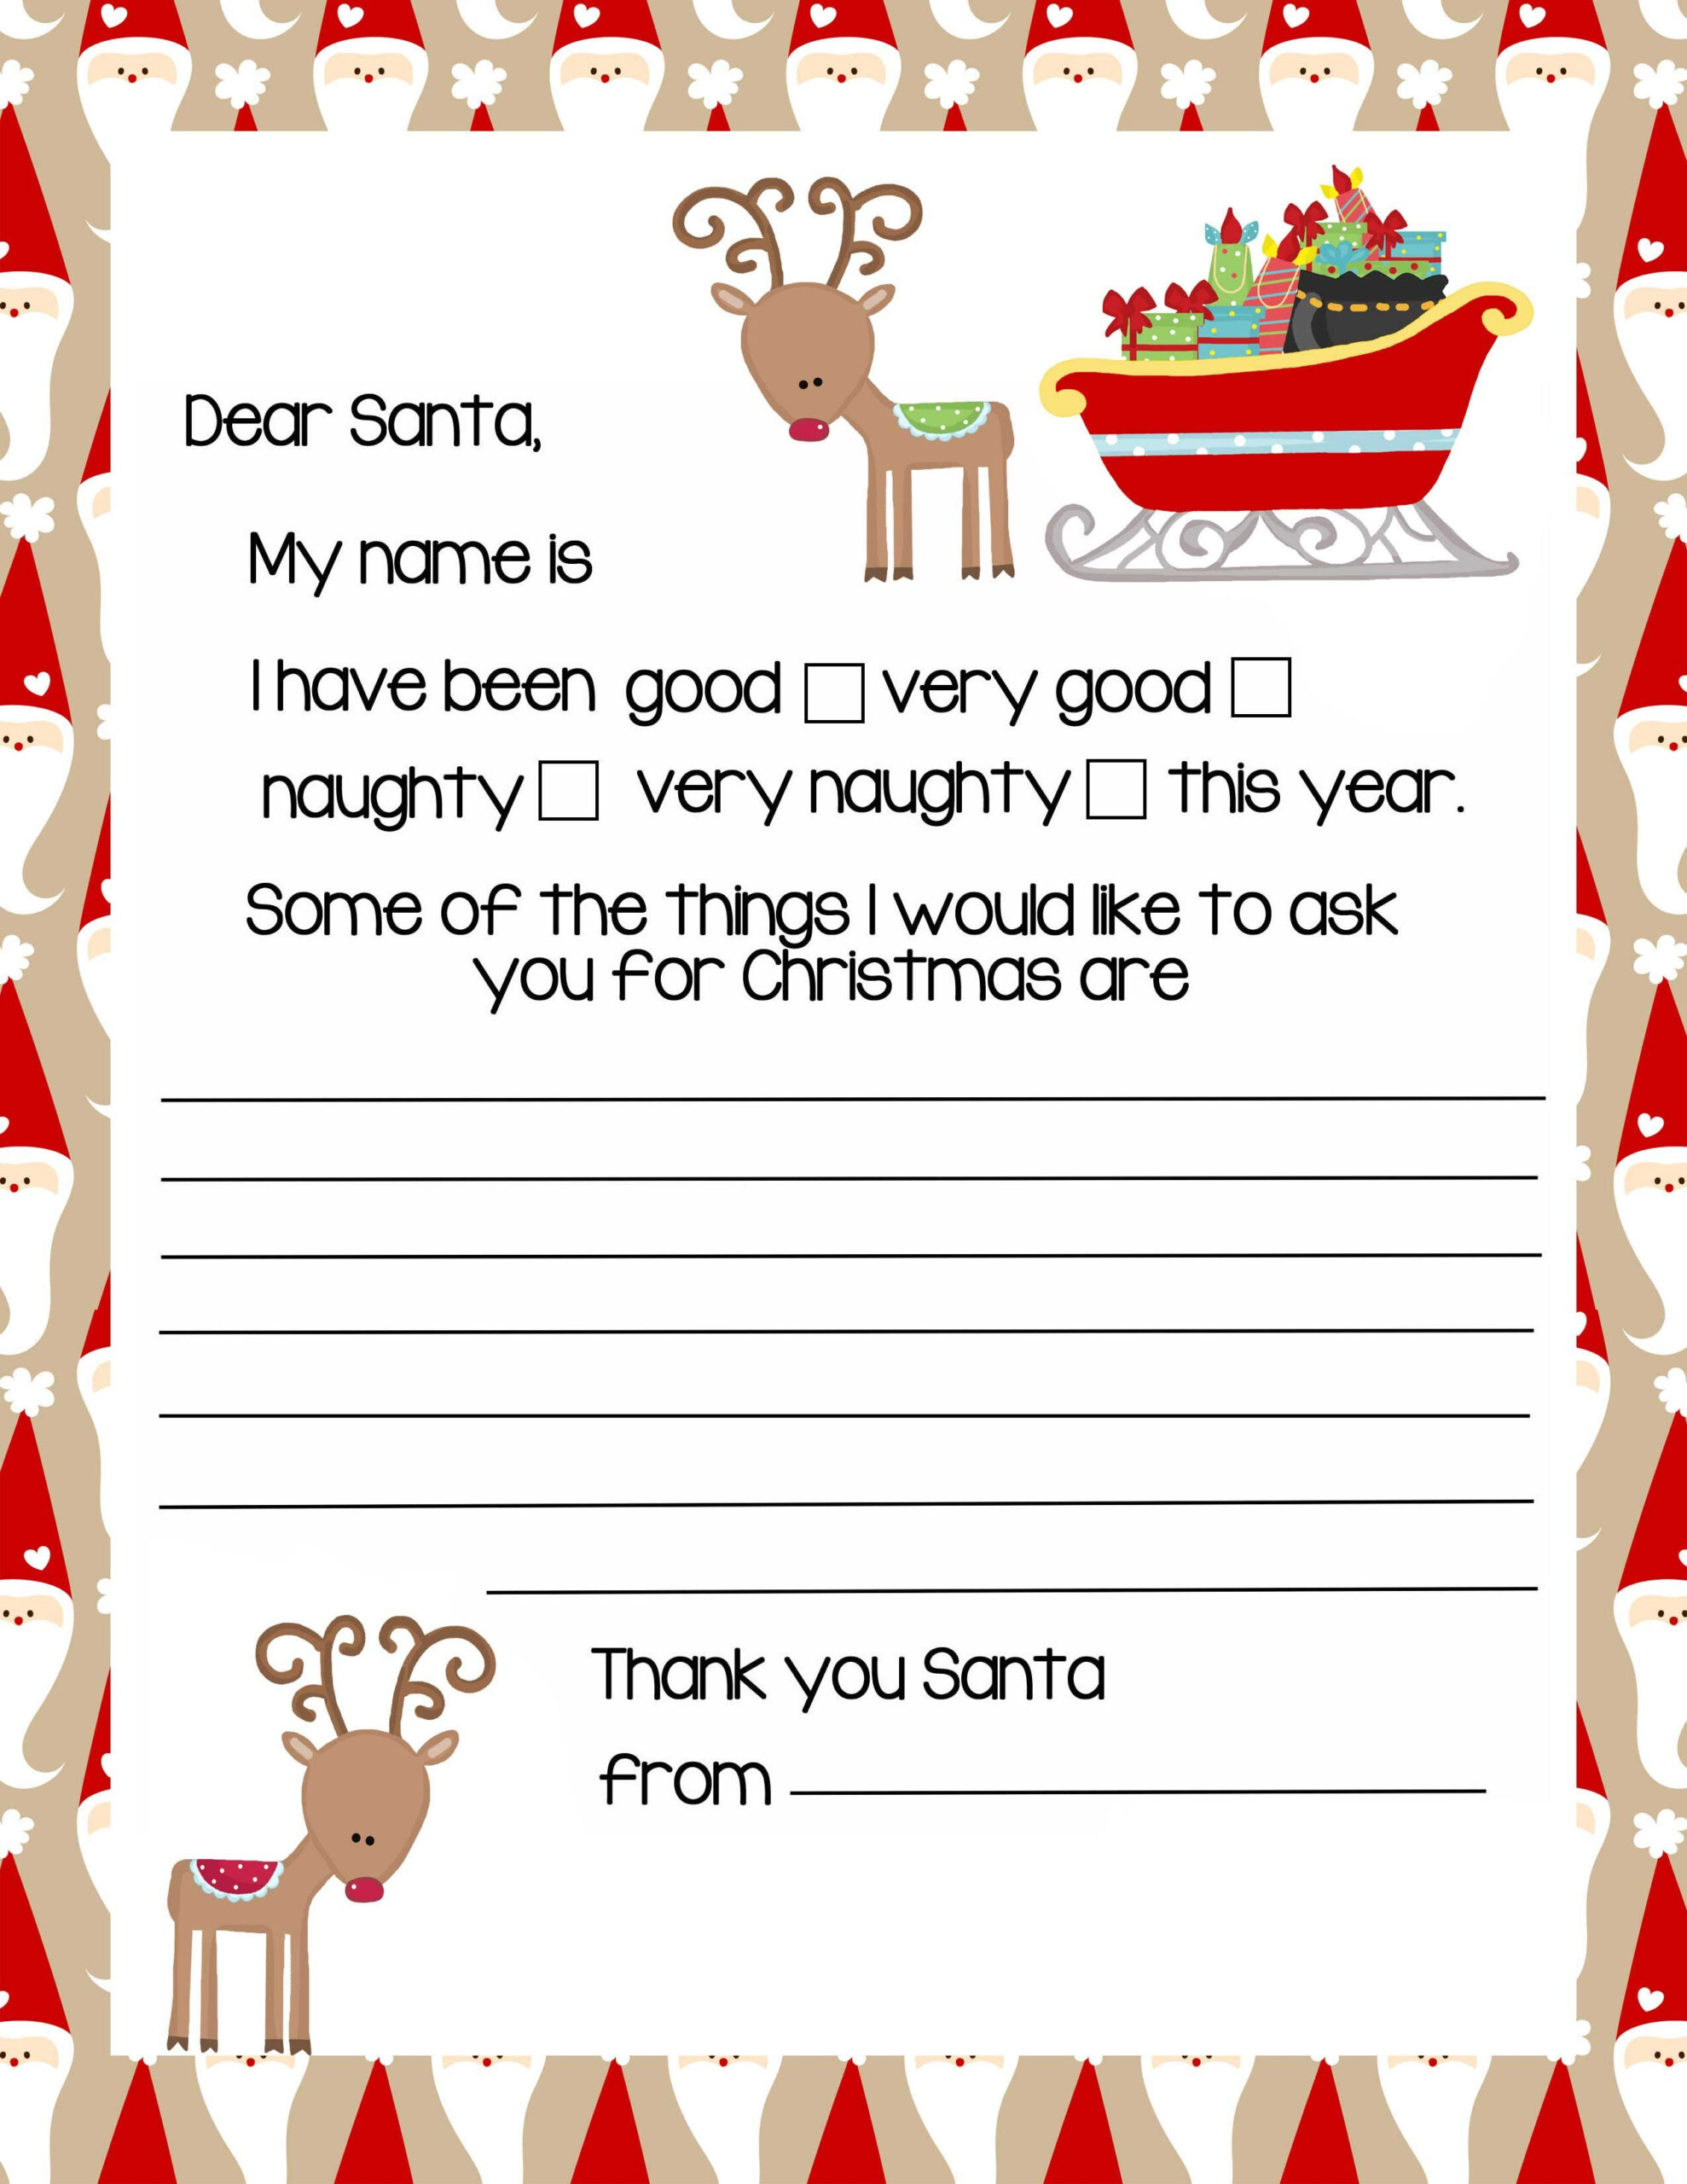 Reindeer Letter To Santa Claus With Images Santa 